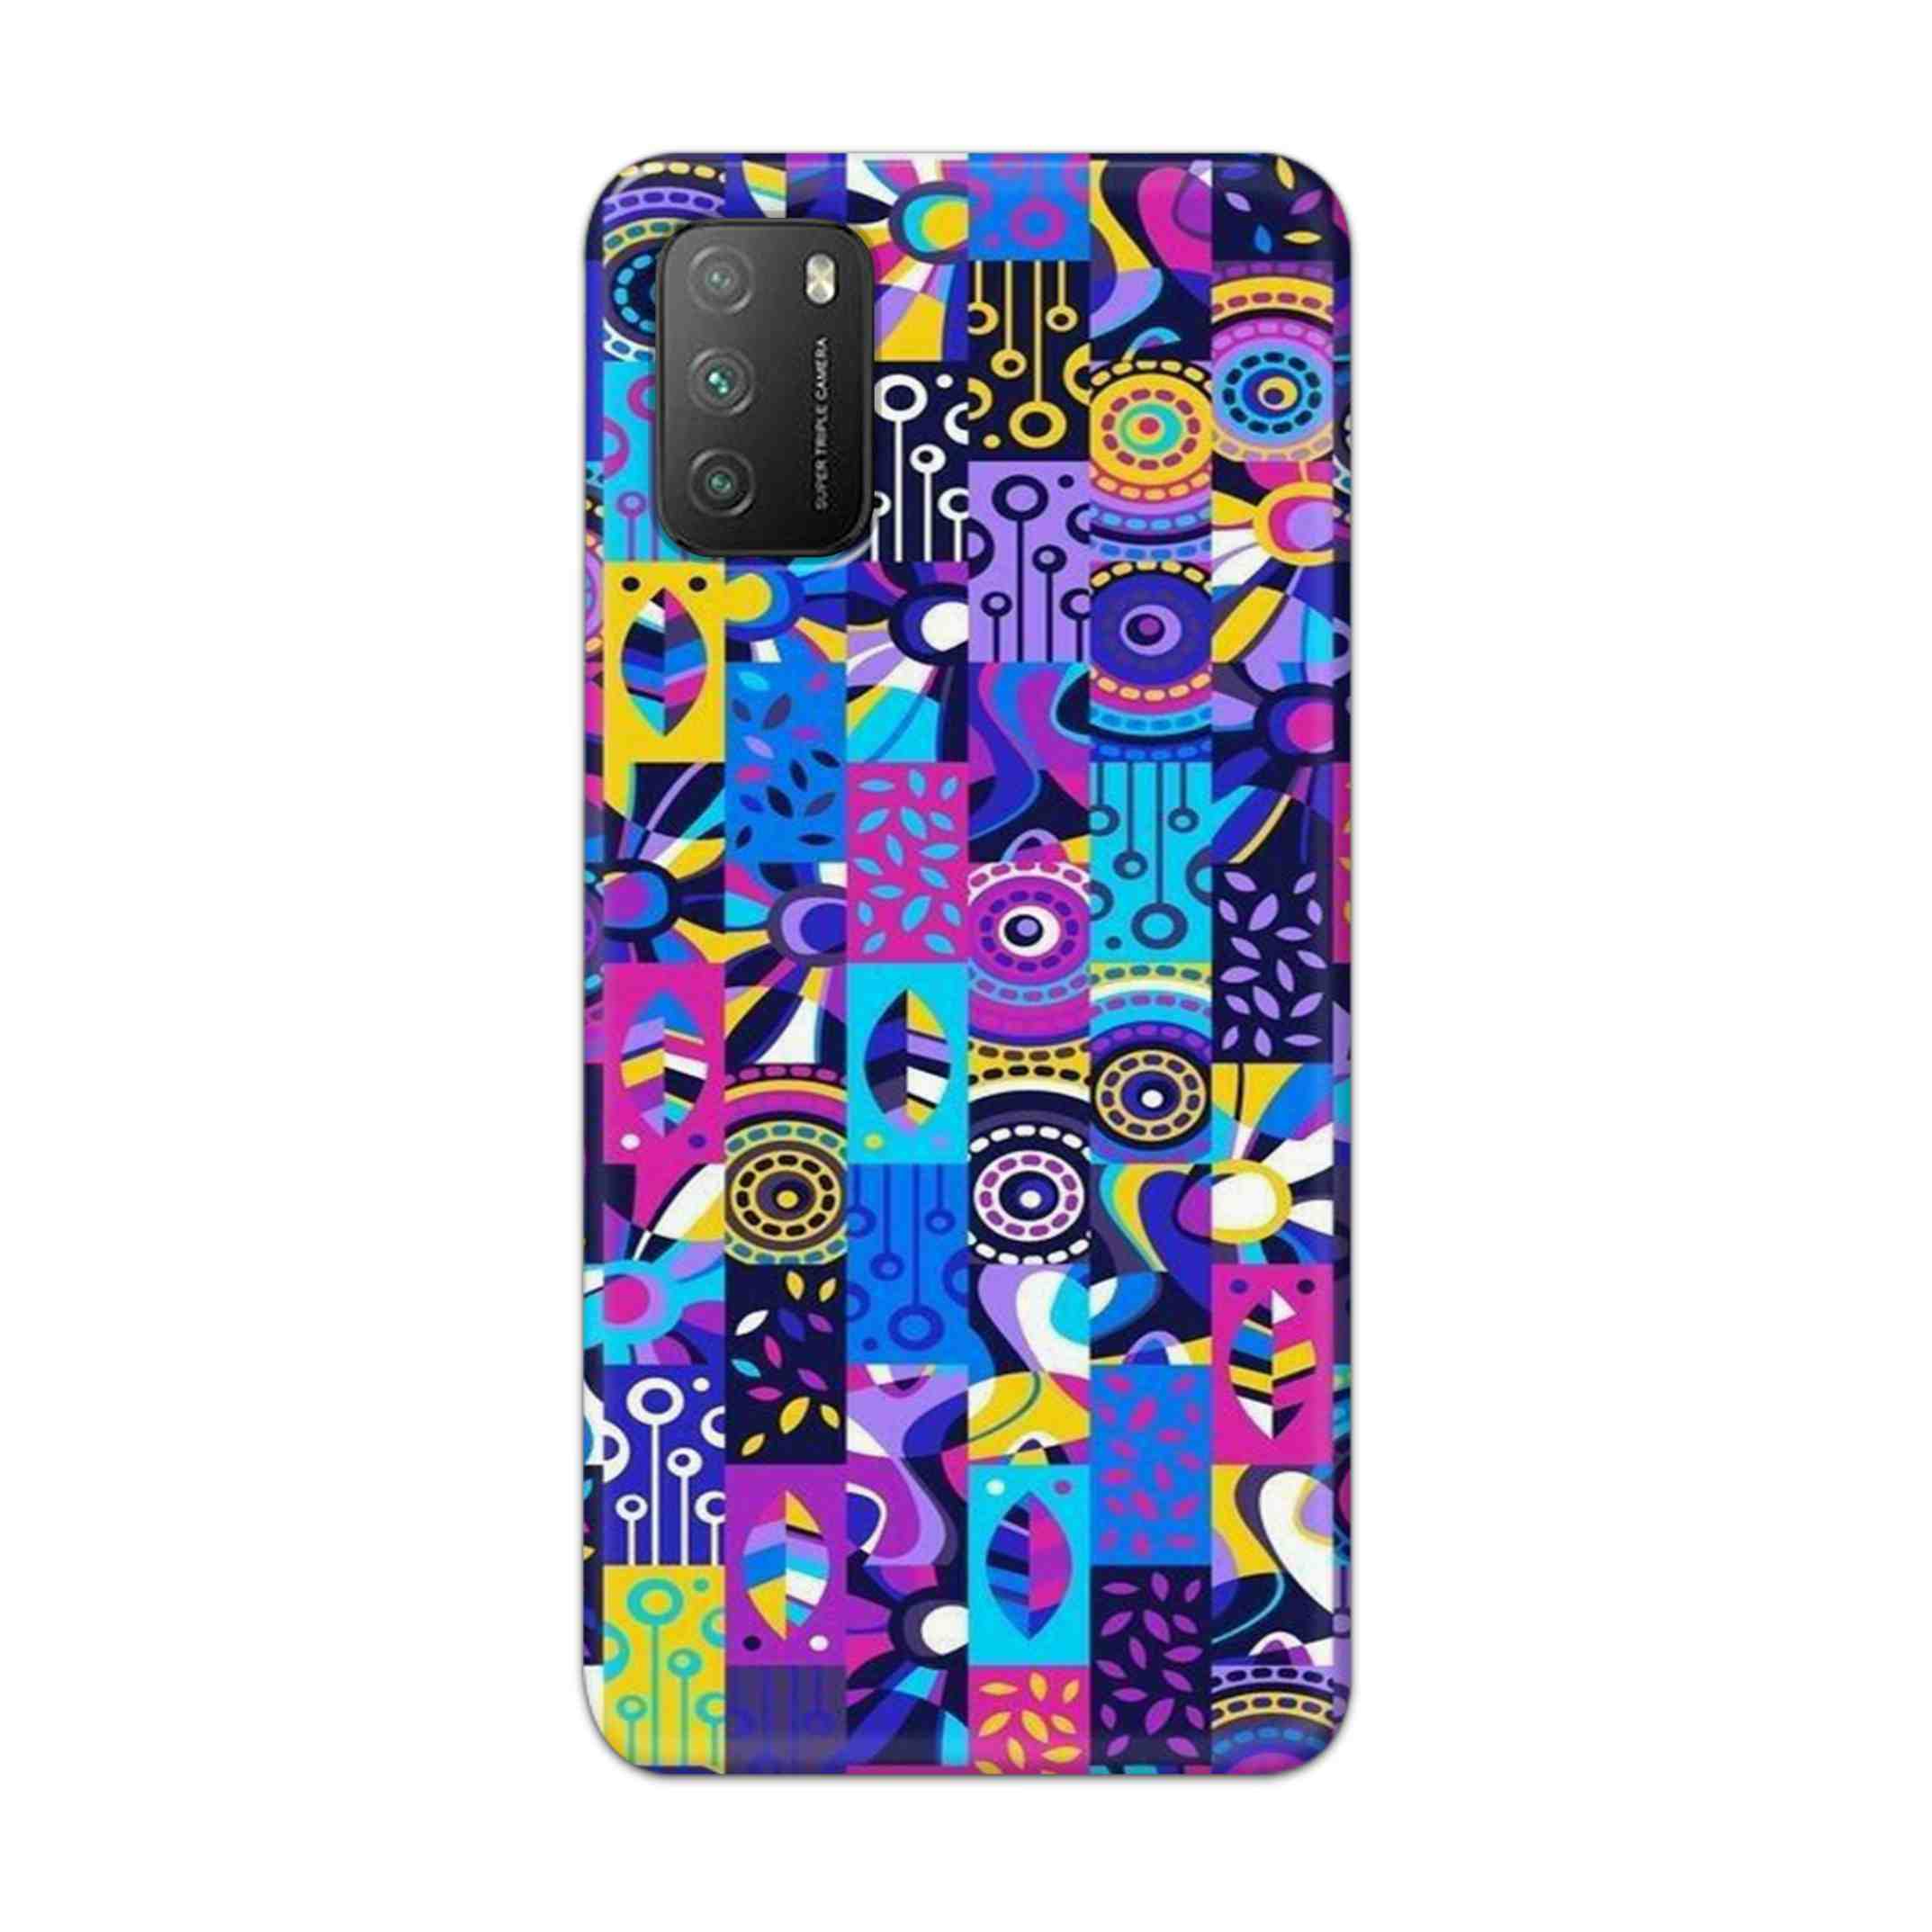 Buy Rainbow Art Hard Back Mobile Phone Case Cover For Poco M3 Online